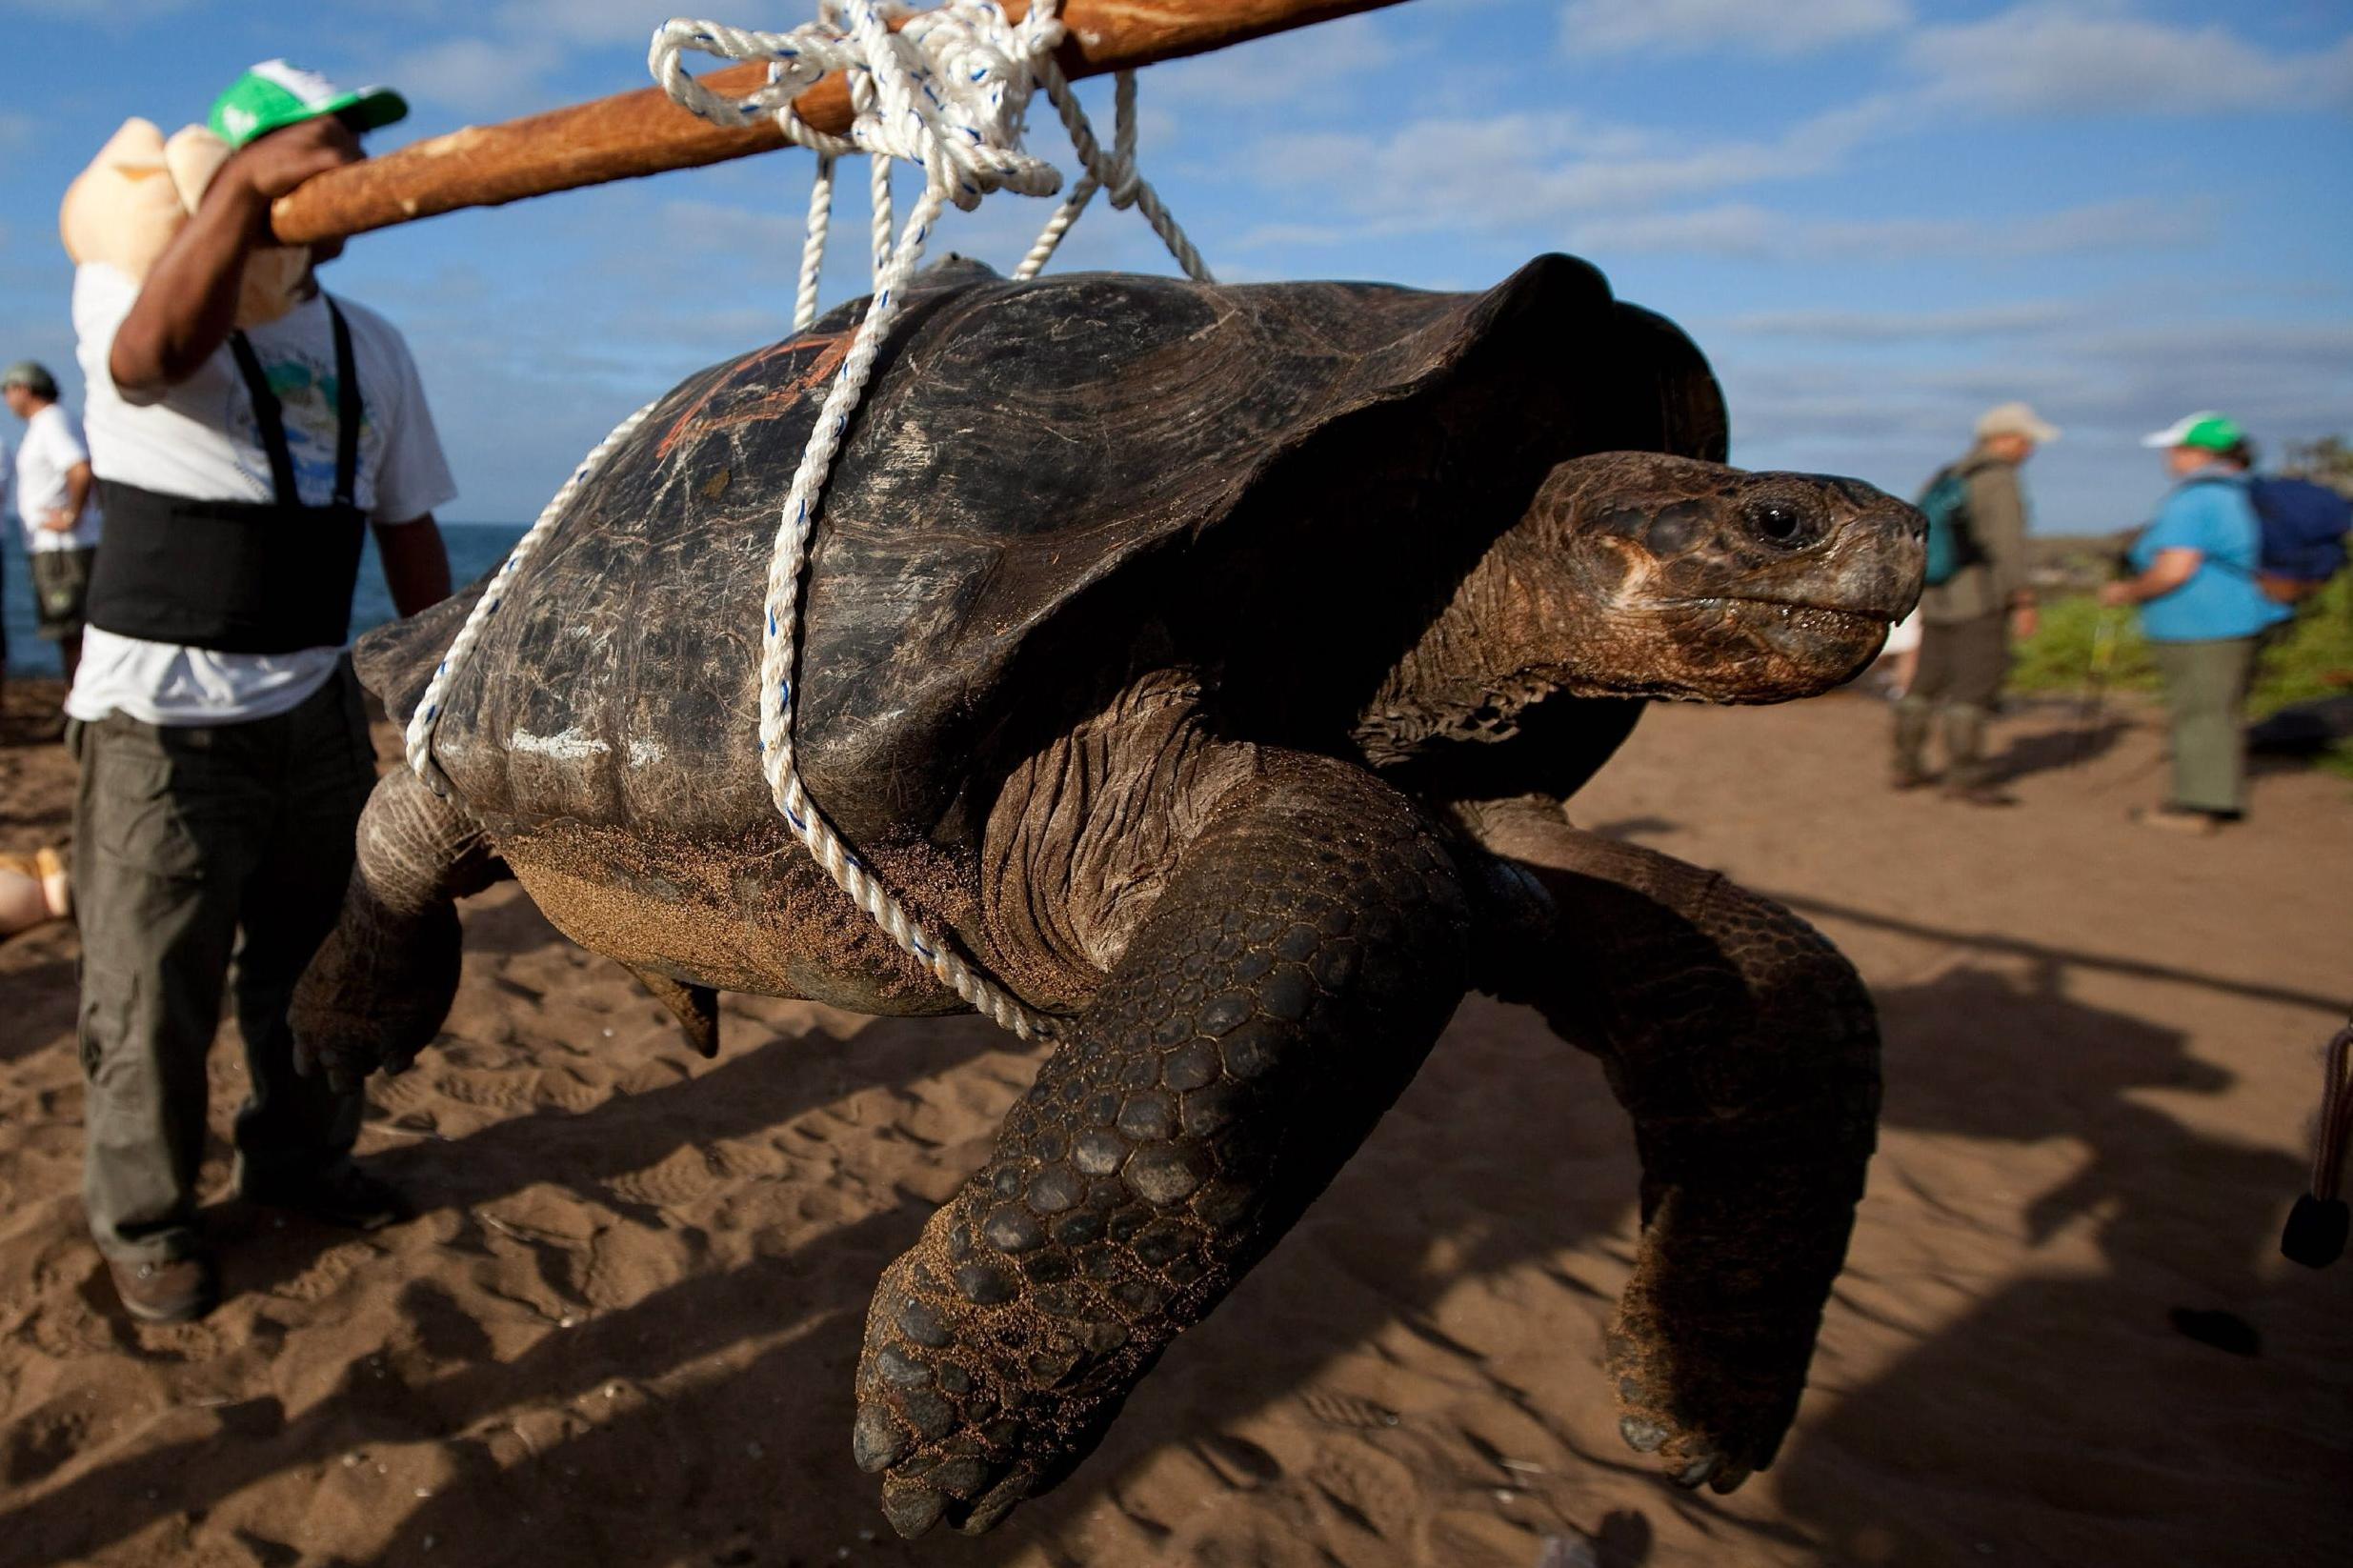 The death of Lonesome George has led to groundbreaking research into the life expectancy of giant tortoises